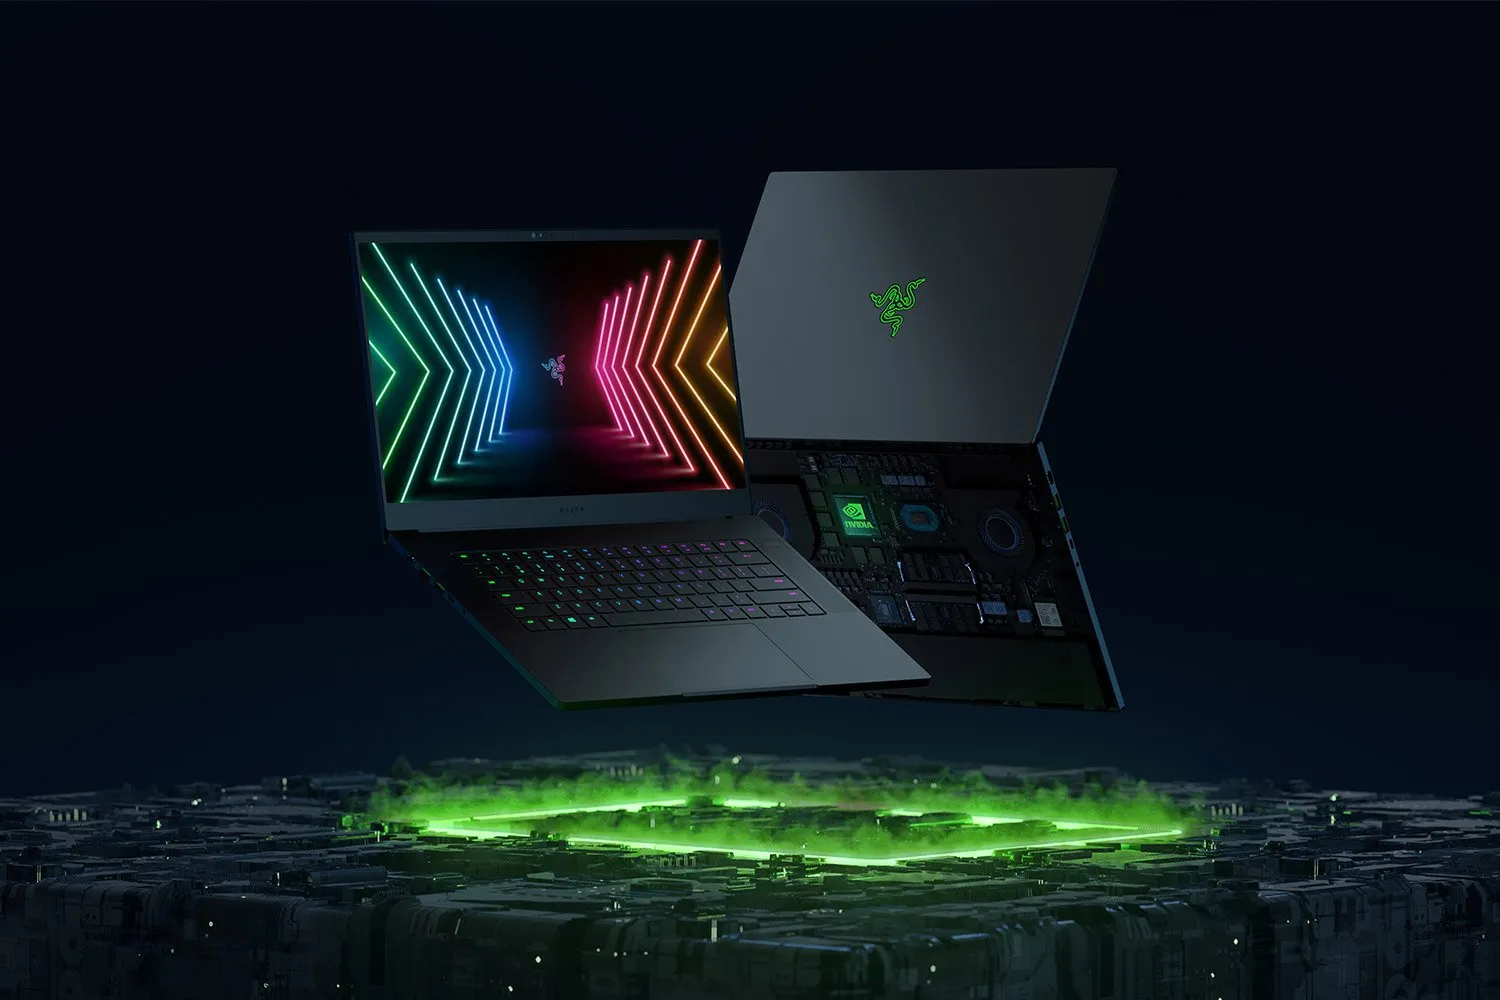 Is It True That The Razer Blade 15 Gaming Laptop Breaks After 1 Year